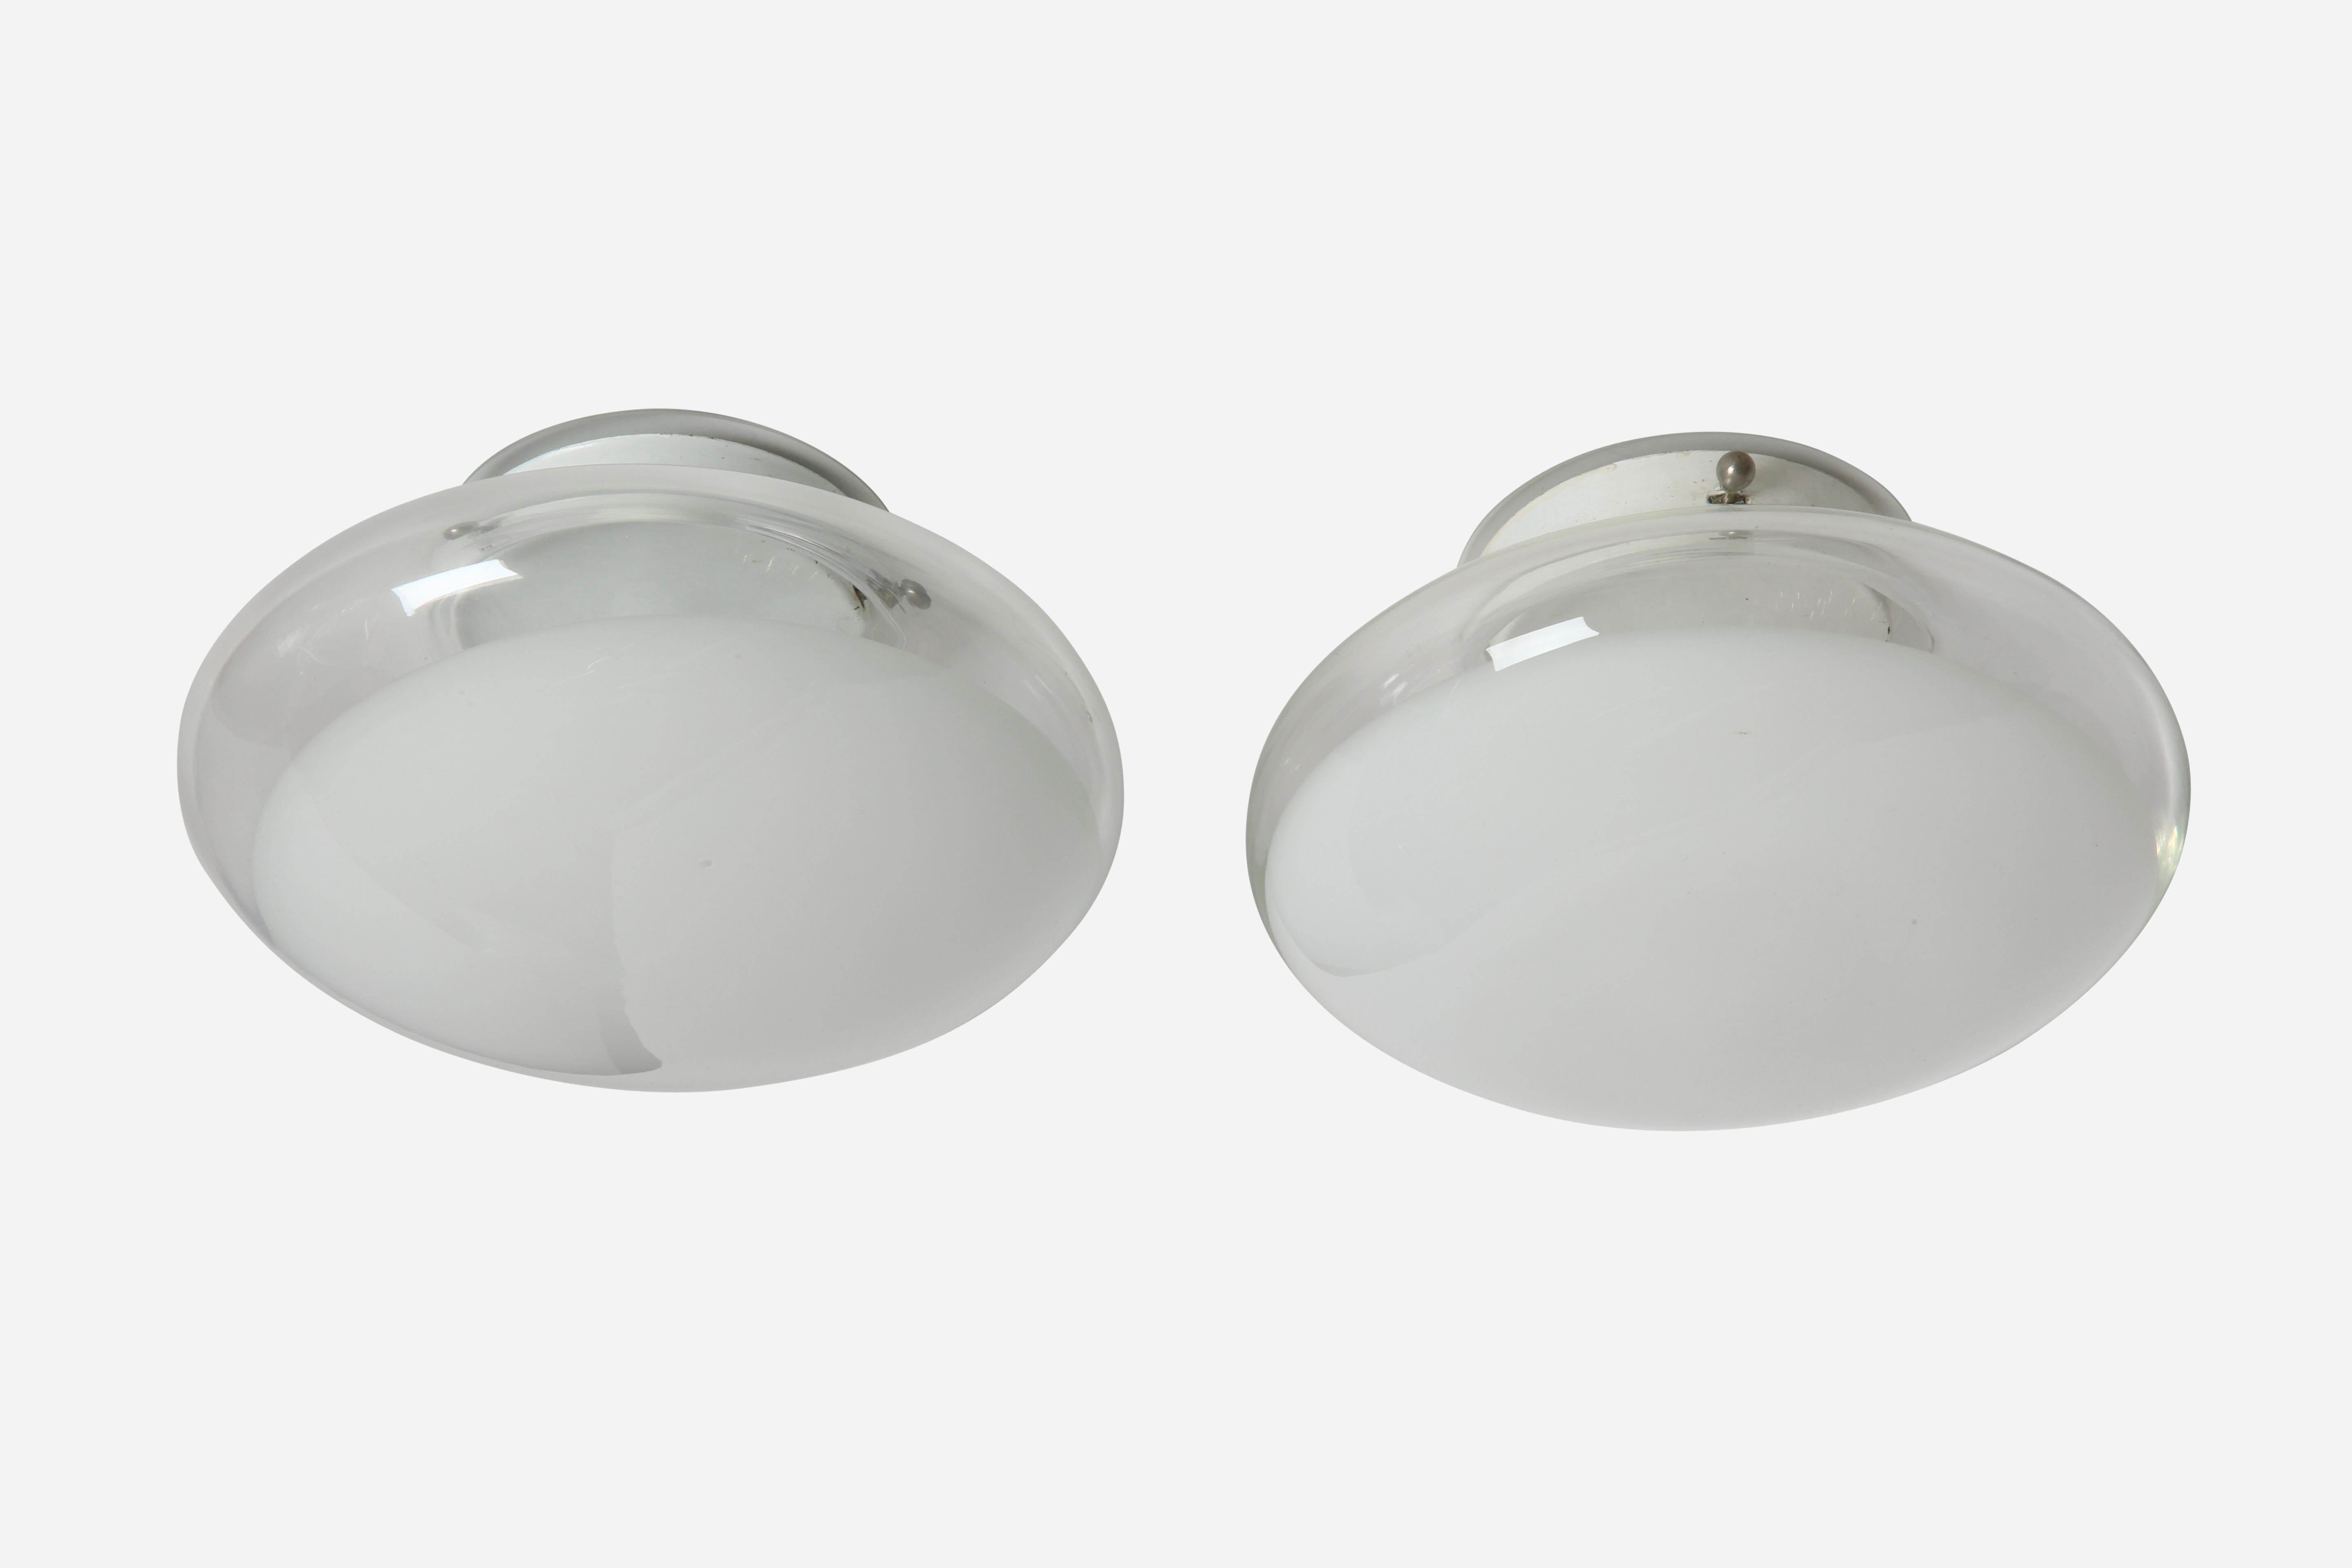 Roberto Pamio for Leucos flush mount ceiling or wall lights, a pair.
Made in Italy in 1970s
Take 1 candelabra bulb each.
Complimentary US rewiring upon request.
Price is for the pair.

At Illustris Lighting our main focus is to deliver lighting